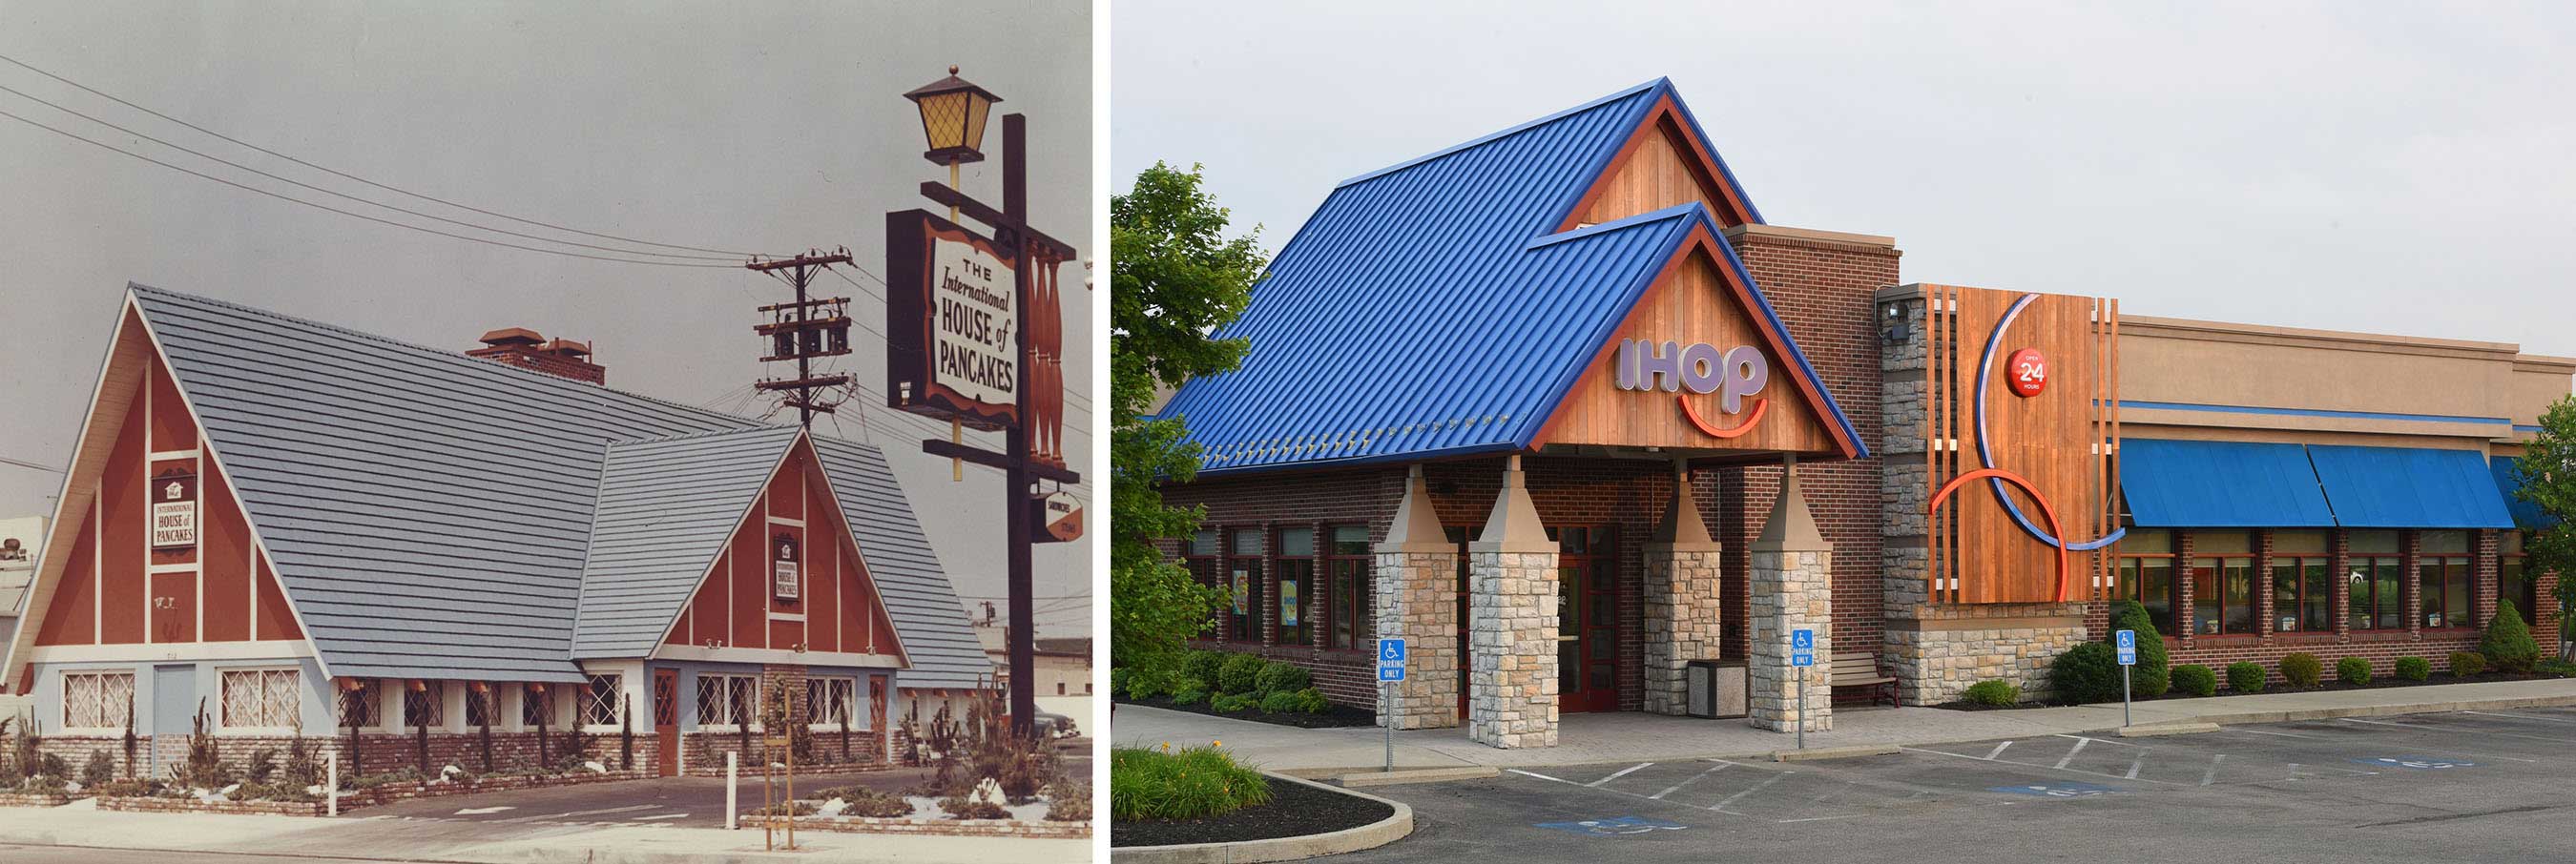 IHOP Restaurants® have always been synonymous with the warm and welcoming dining experience guests can enjoy with friends and family, and is always focused on bringing something fresh to the table, the brand continues to reinvent — and reinvest in — the total guest experience.